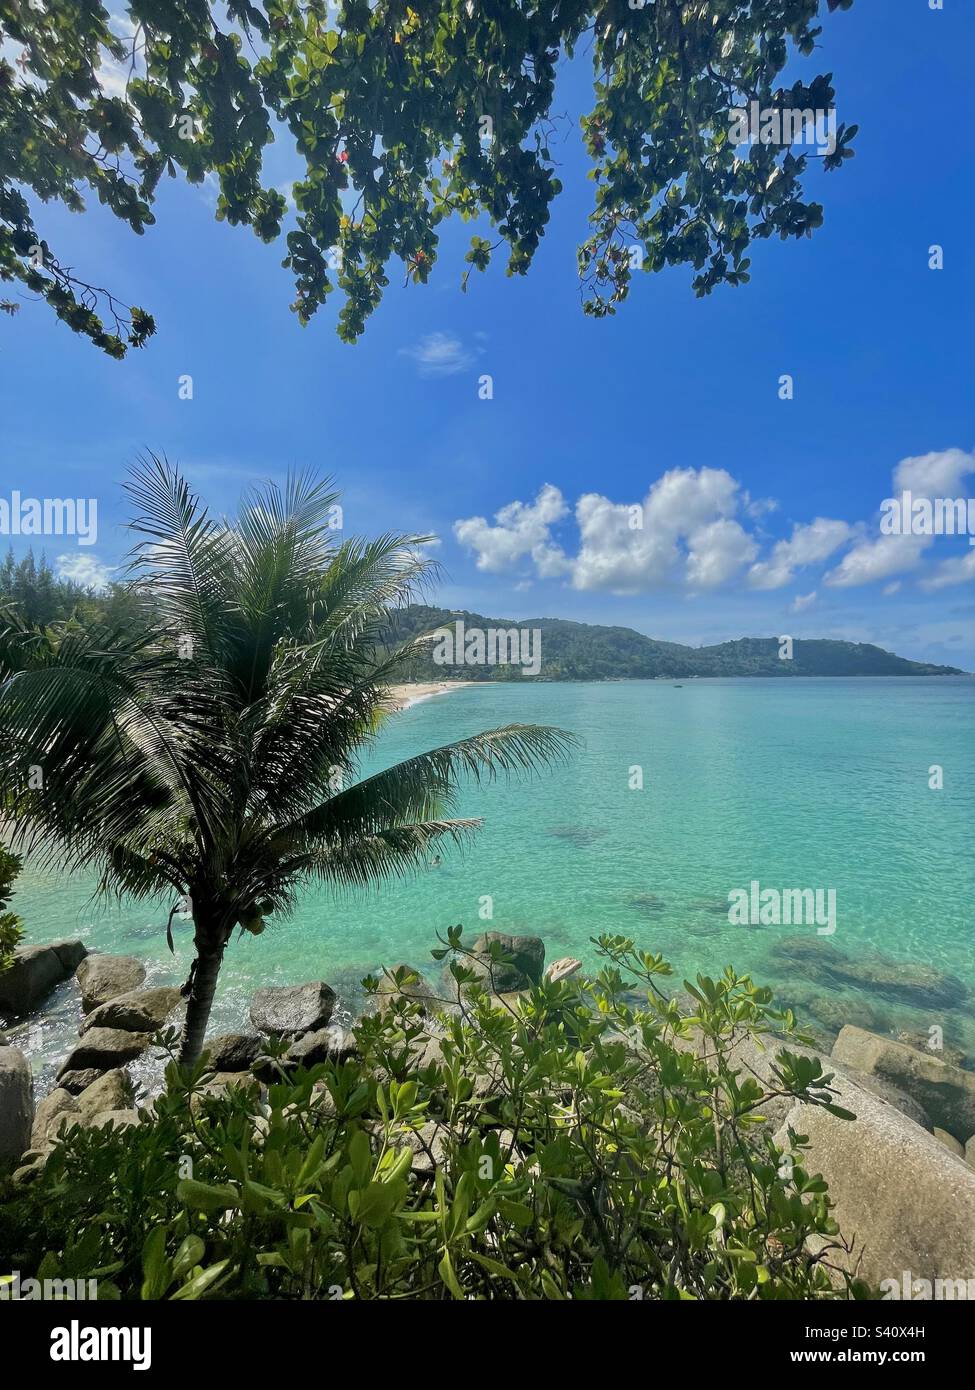 Turquoise seas, a palm tree and a clear blue sky seen at Kata Noi Beach in Phuket, Thailand. Stock Photo